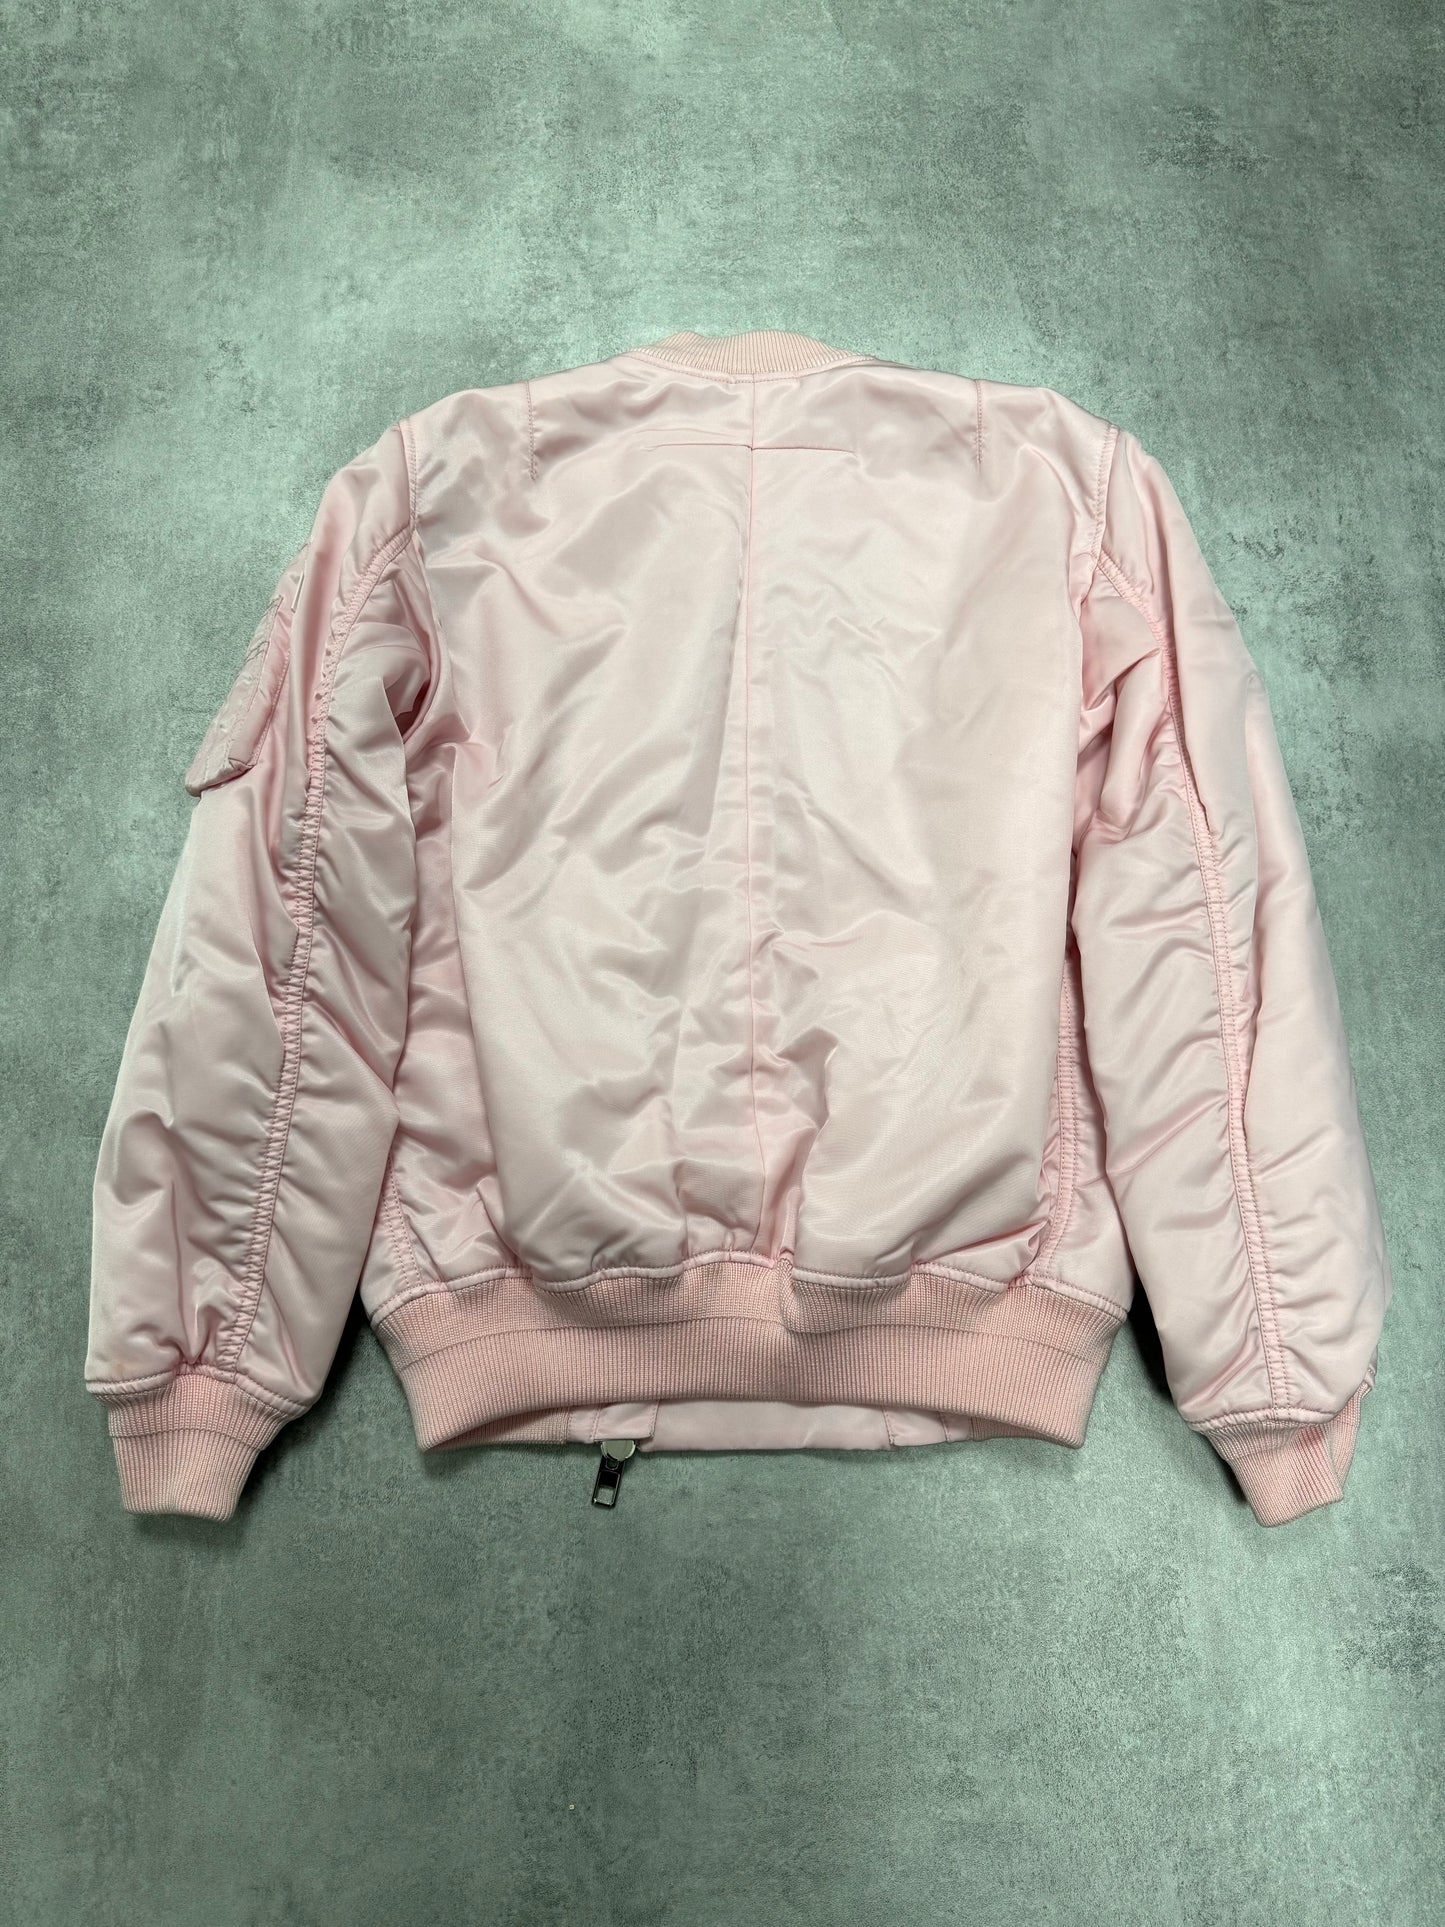 AW2016 Givenchy Pink Asymmetrical Zips Bomber Jacket (S)